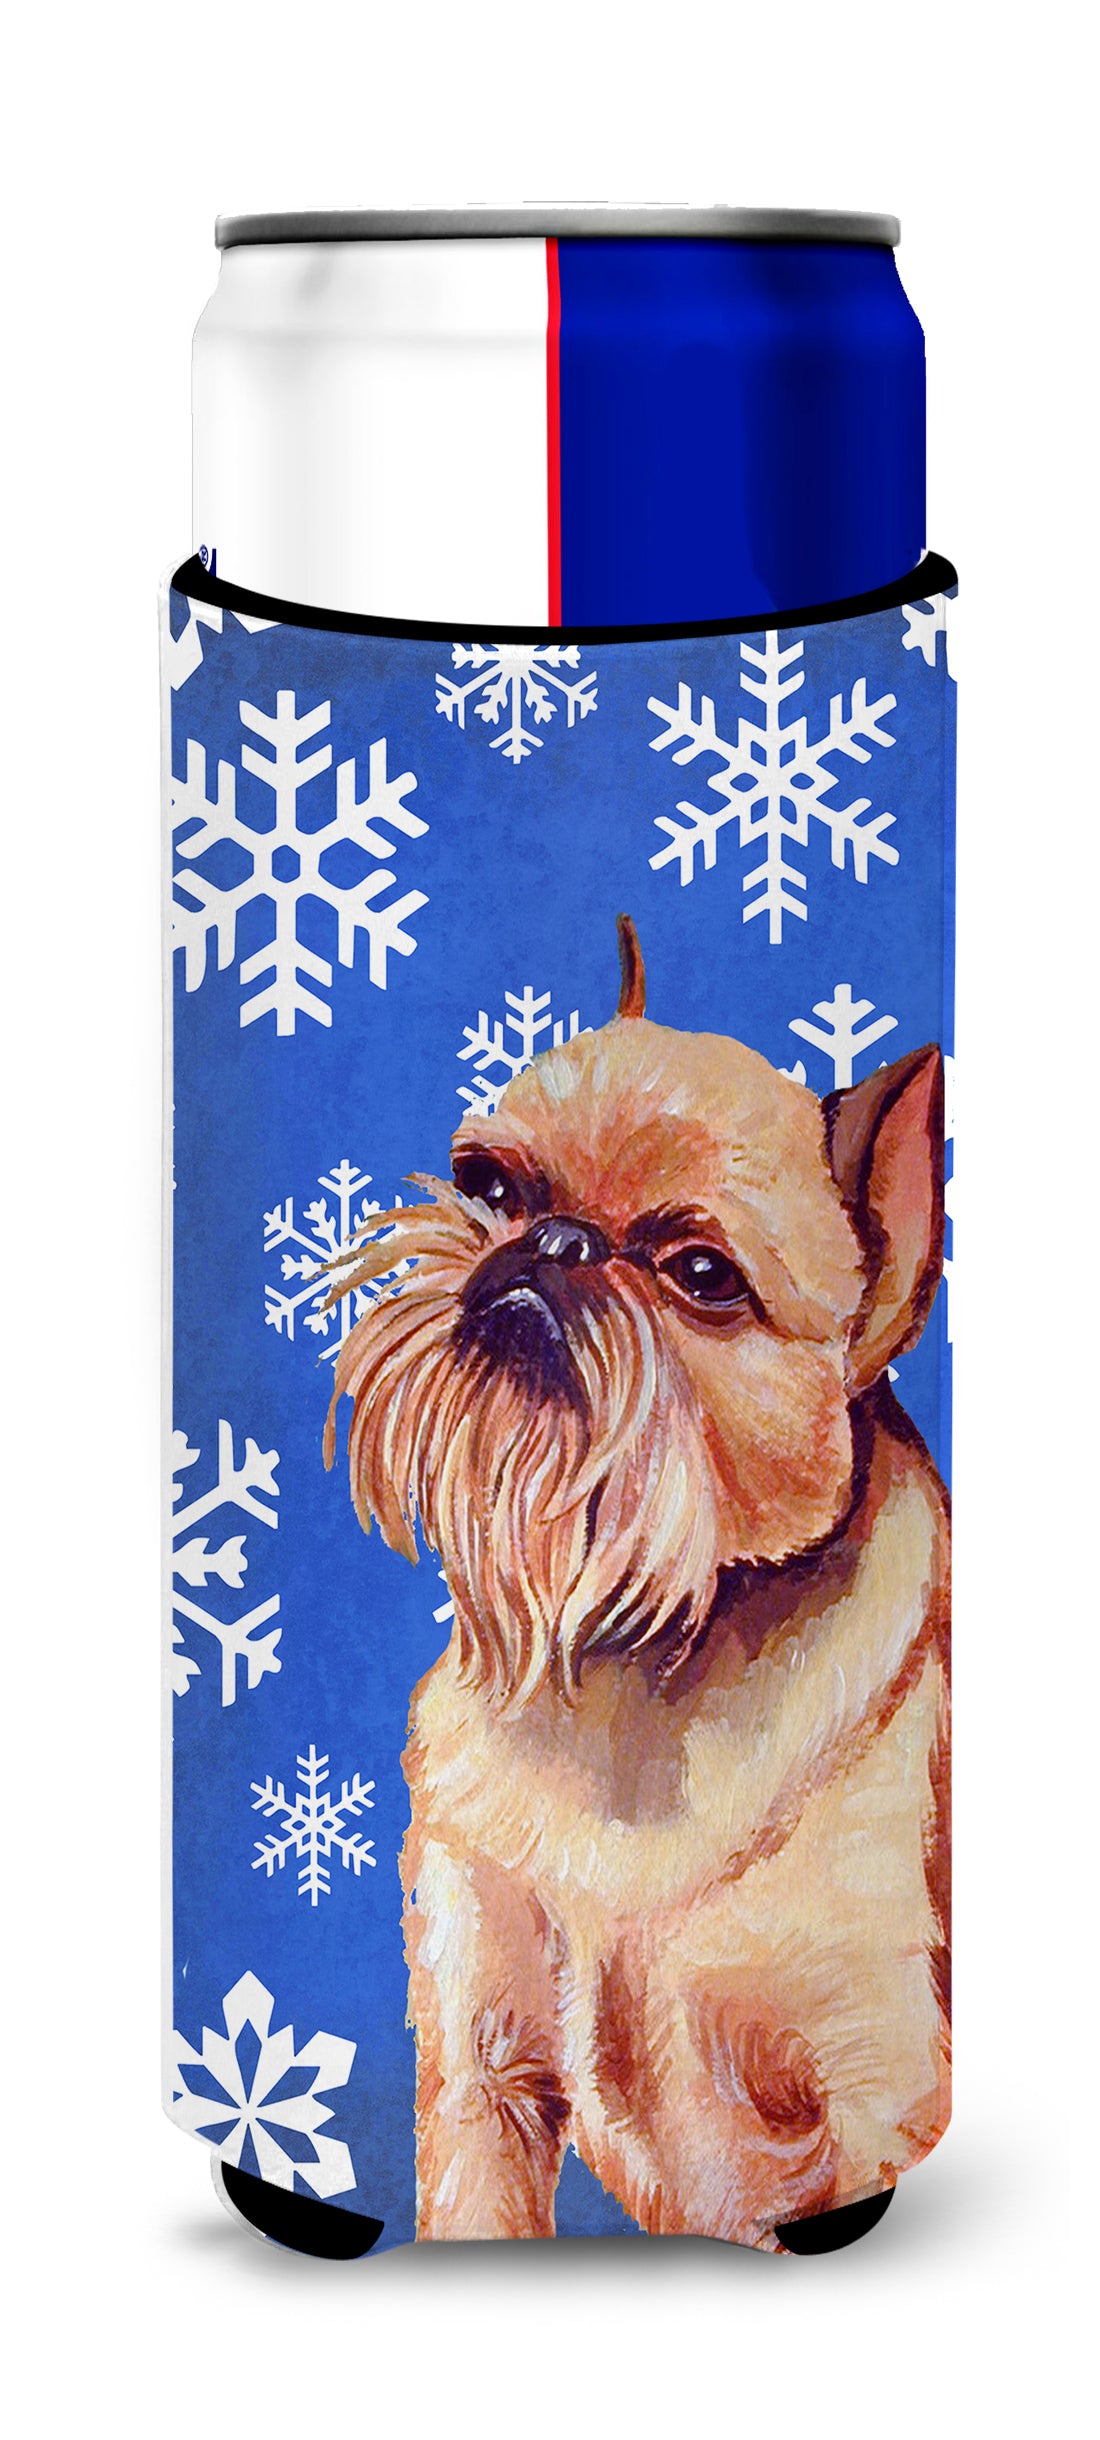 Brussels Griffon Winter Snowflakes Holiday Ultra Beverage Insulators for slim cans LH9269MUK.